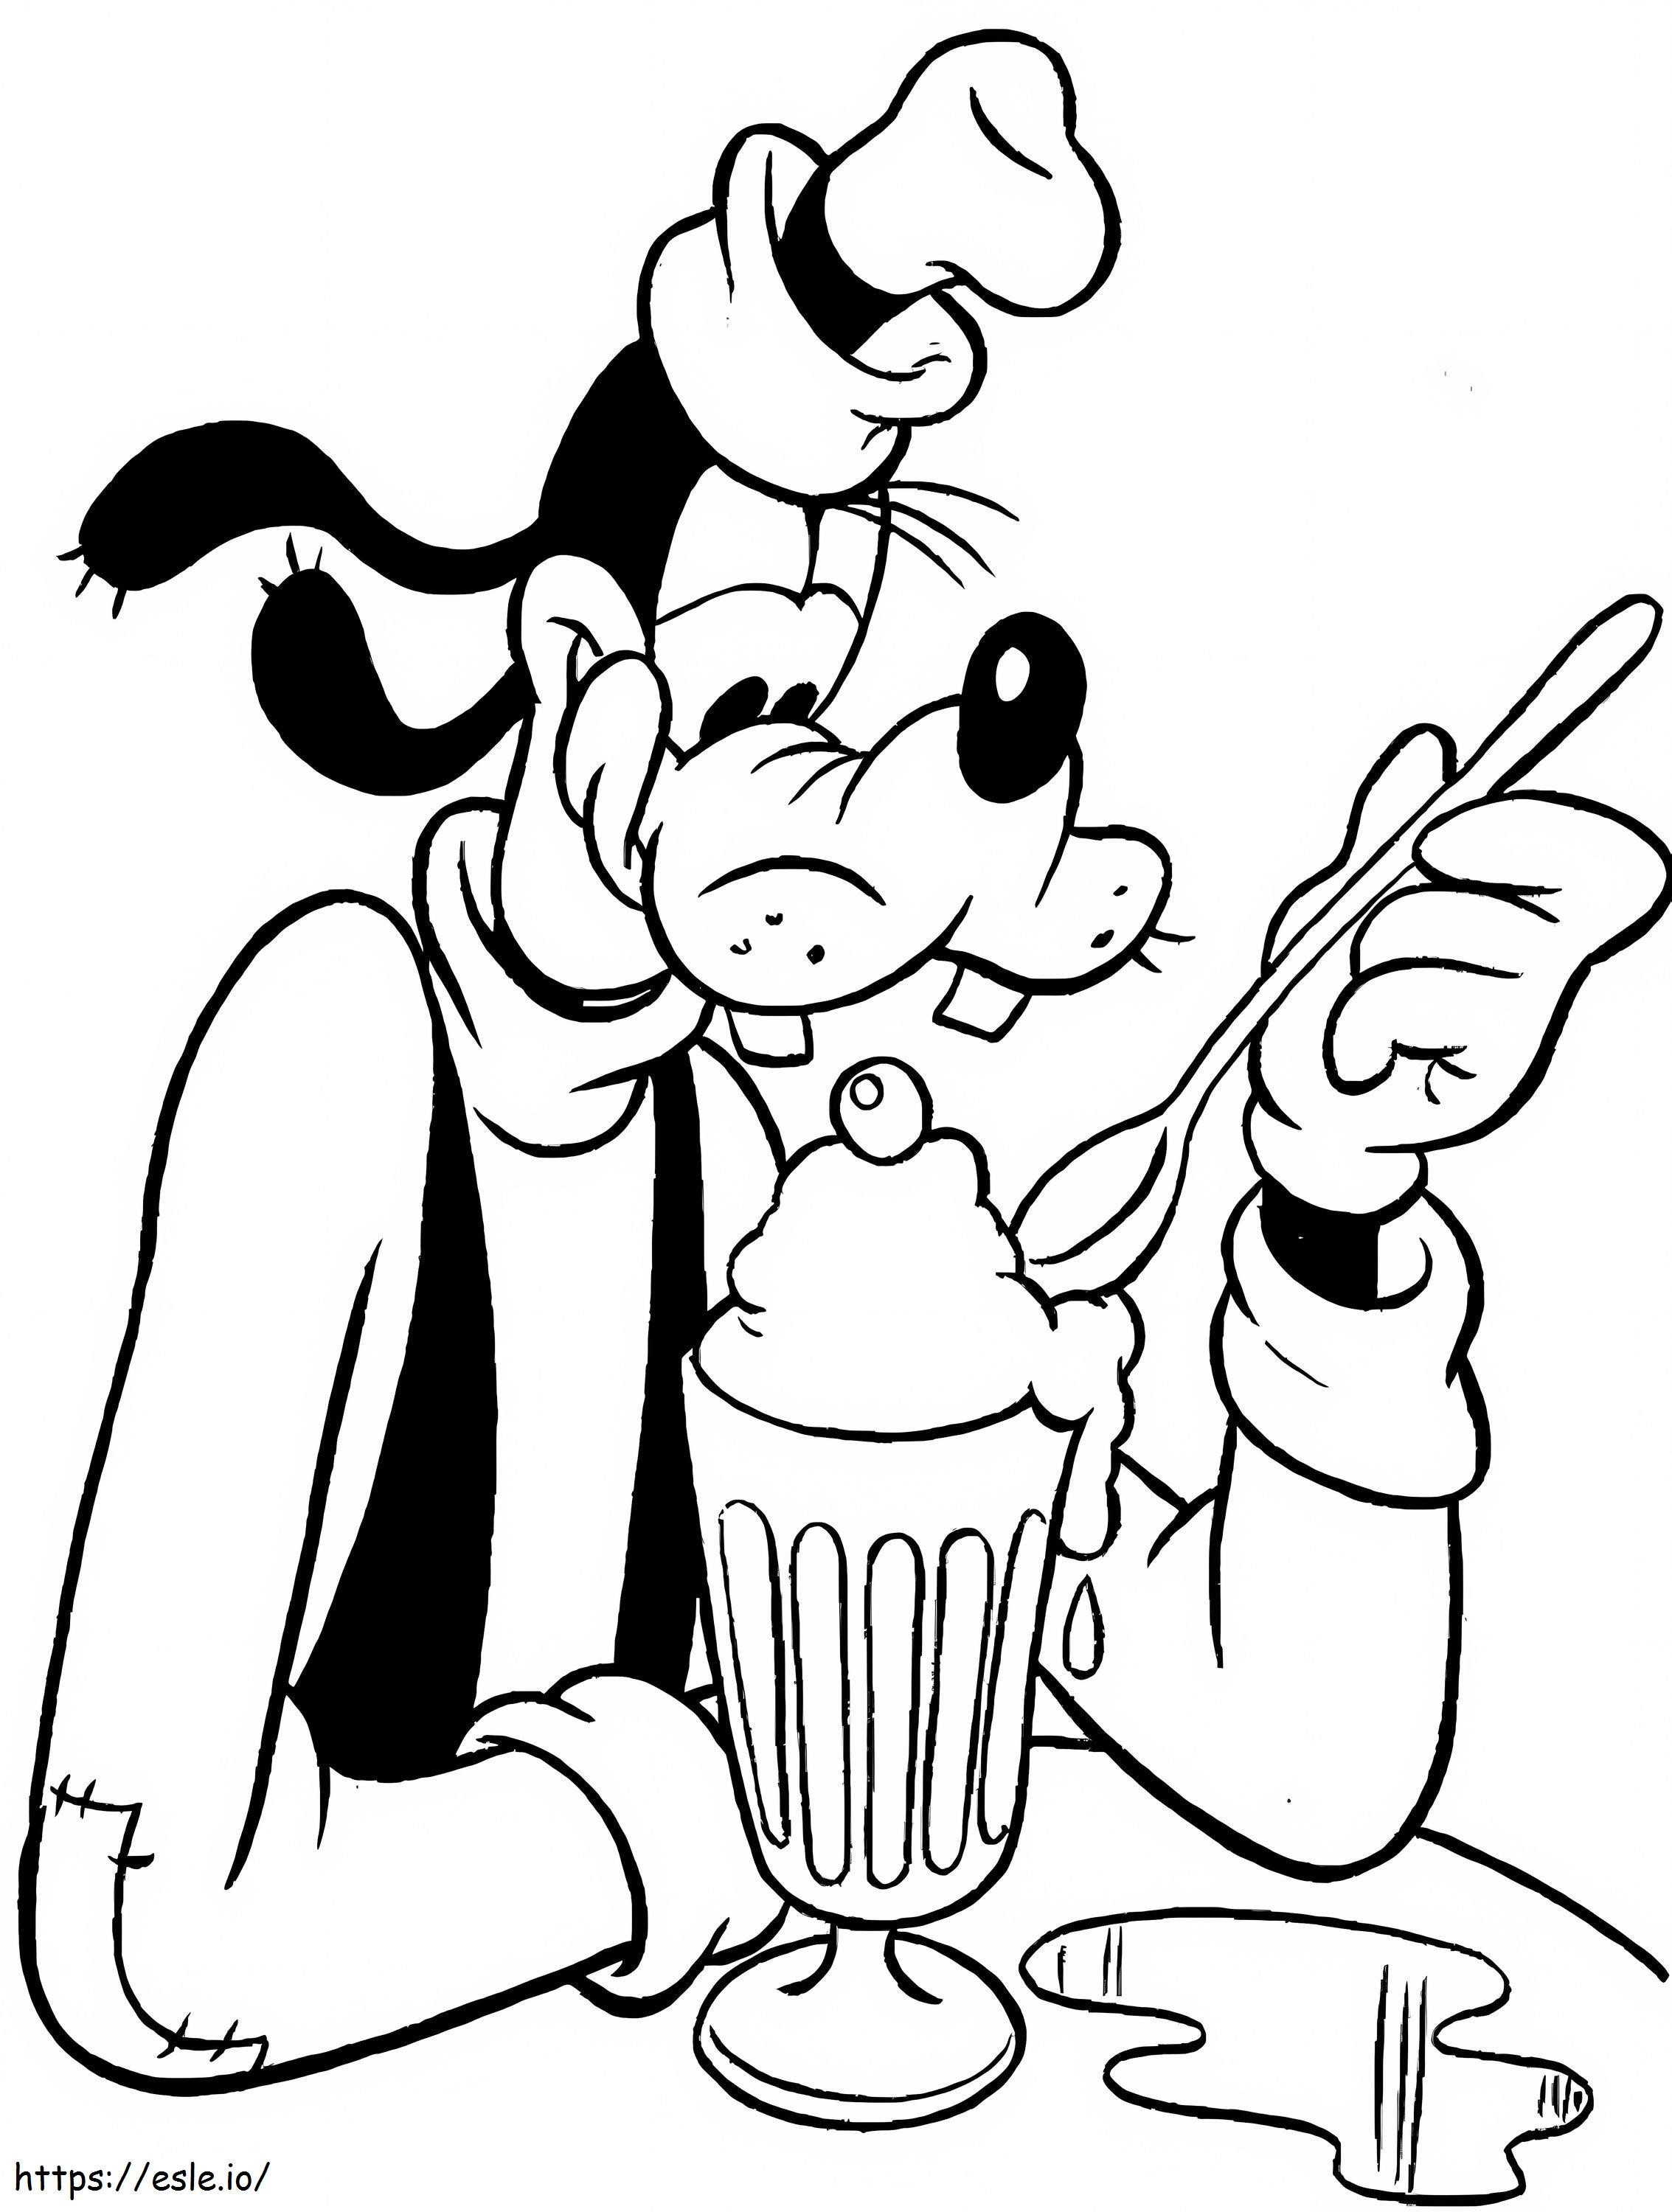 Goofy Eating Ice Cream coloring page